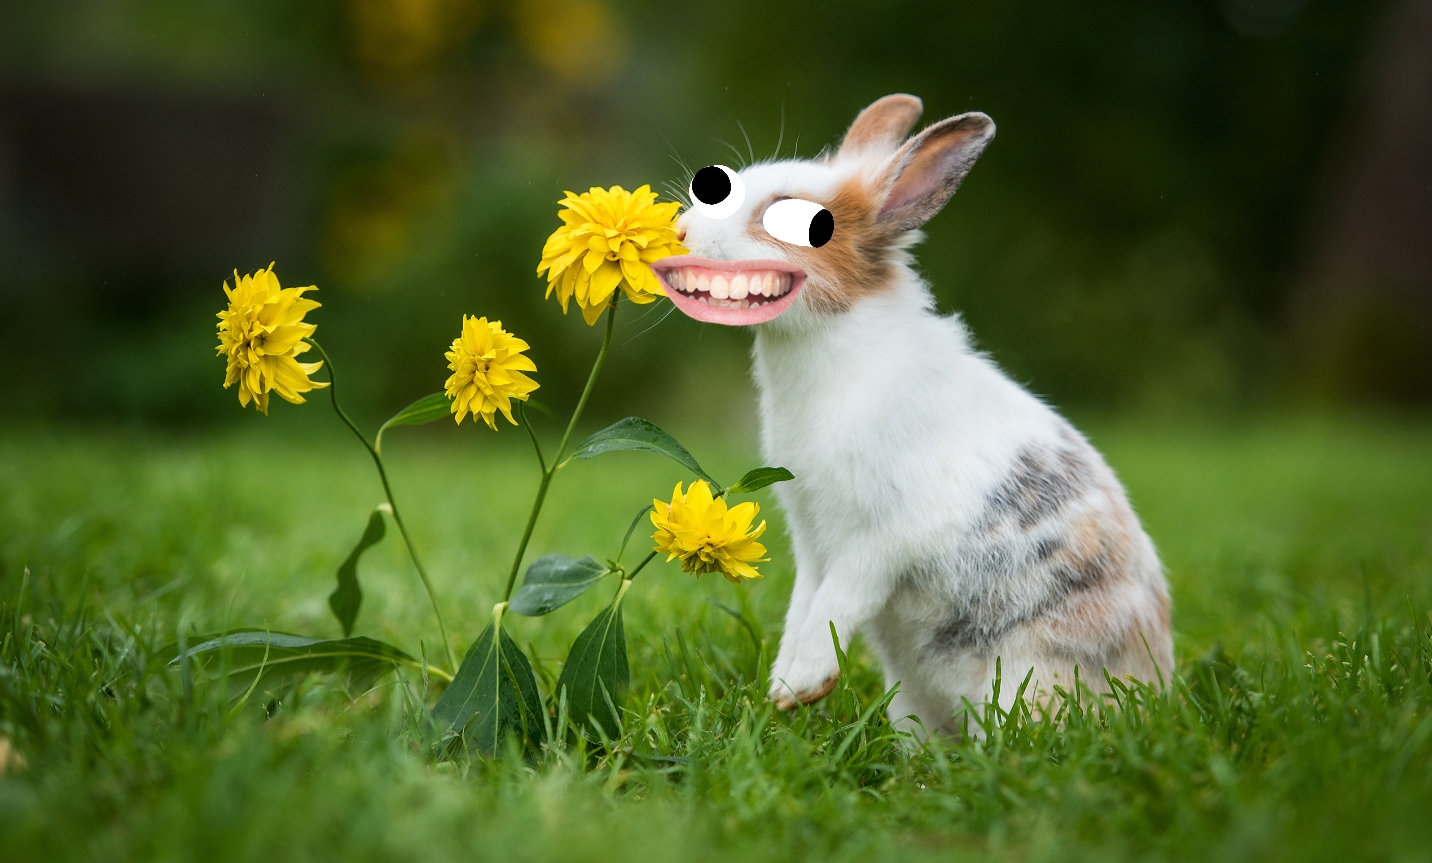 Rabbit with funny eyes and human mouth